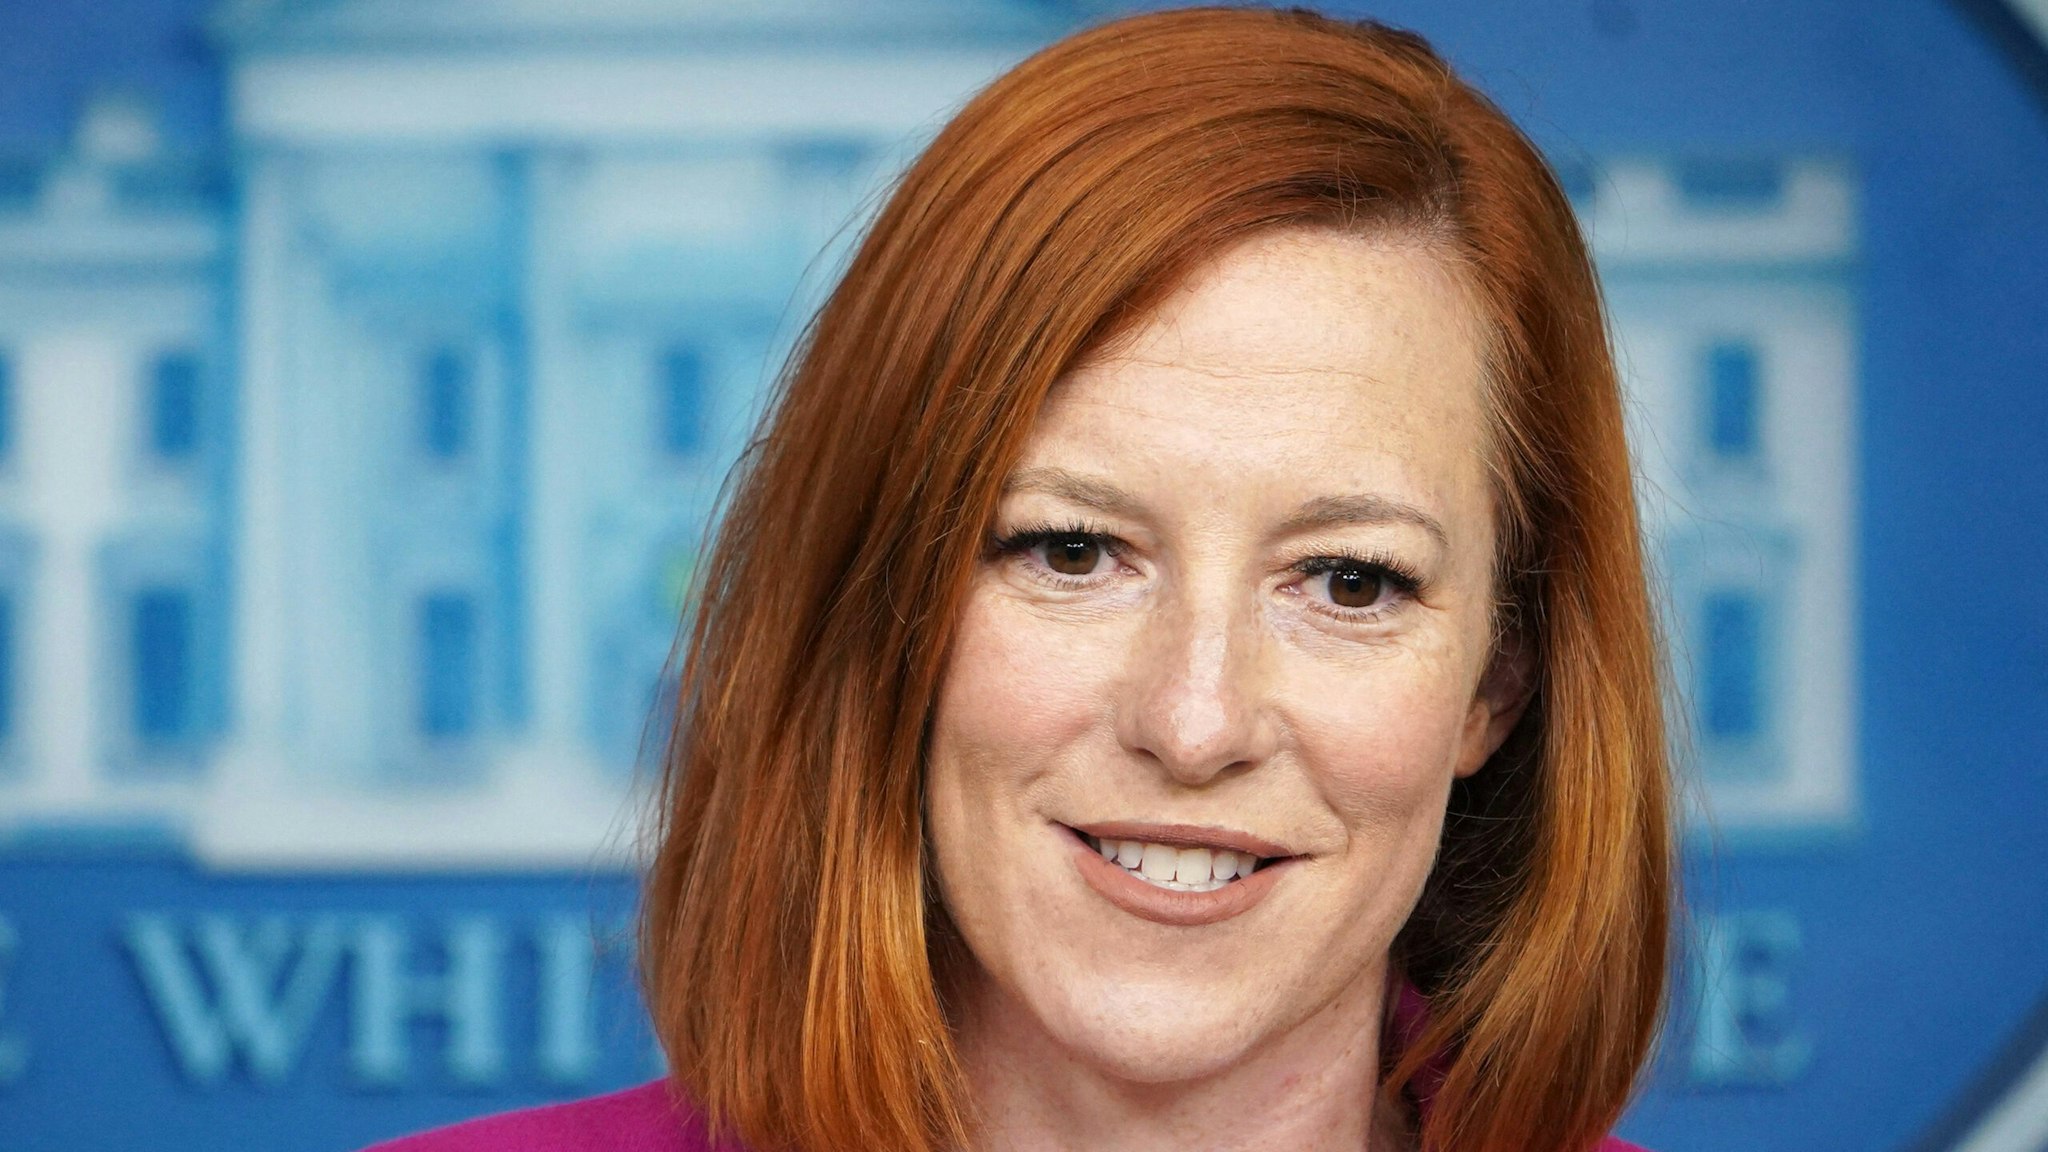 White House Press Secretary Jen Psaki speaks during the daily press briefing on October 22, 2021, in the Brady Briefing Room of the White House in Washington, DC.